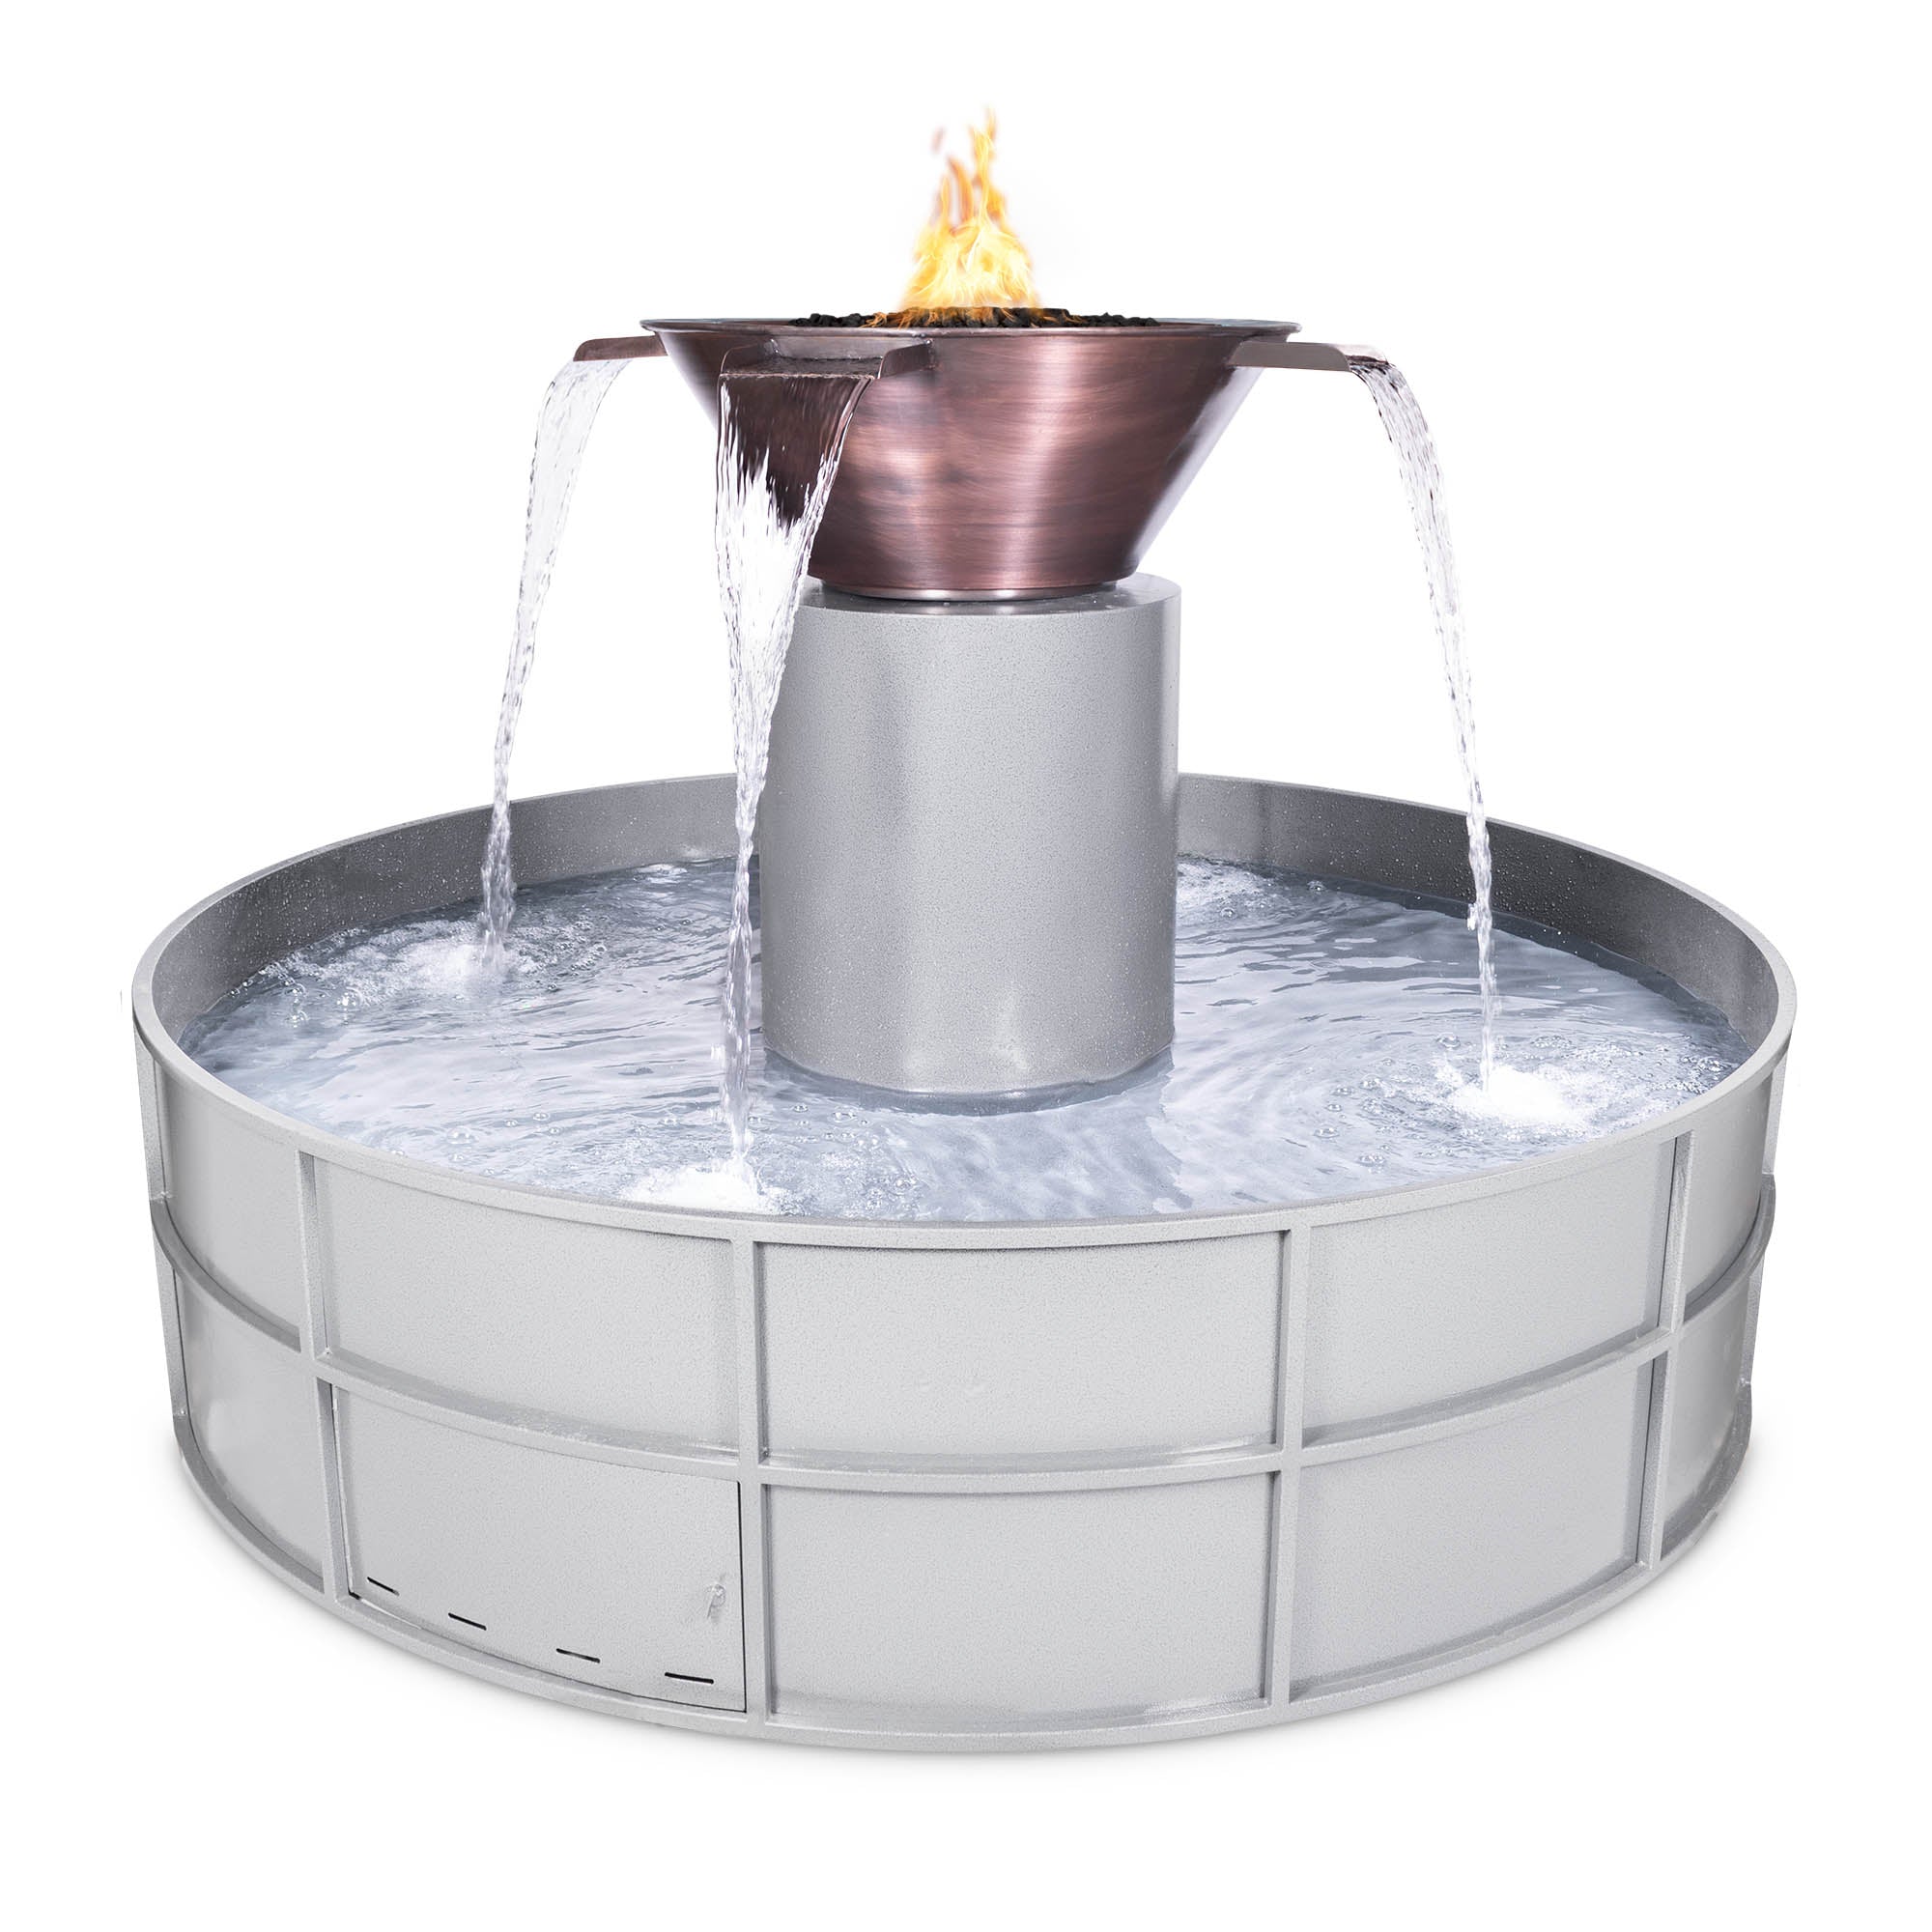 The Outdoor Plus 60″ Olympian 4 Way Spill Fire & Water Fountain